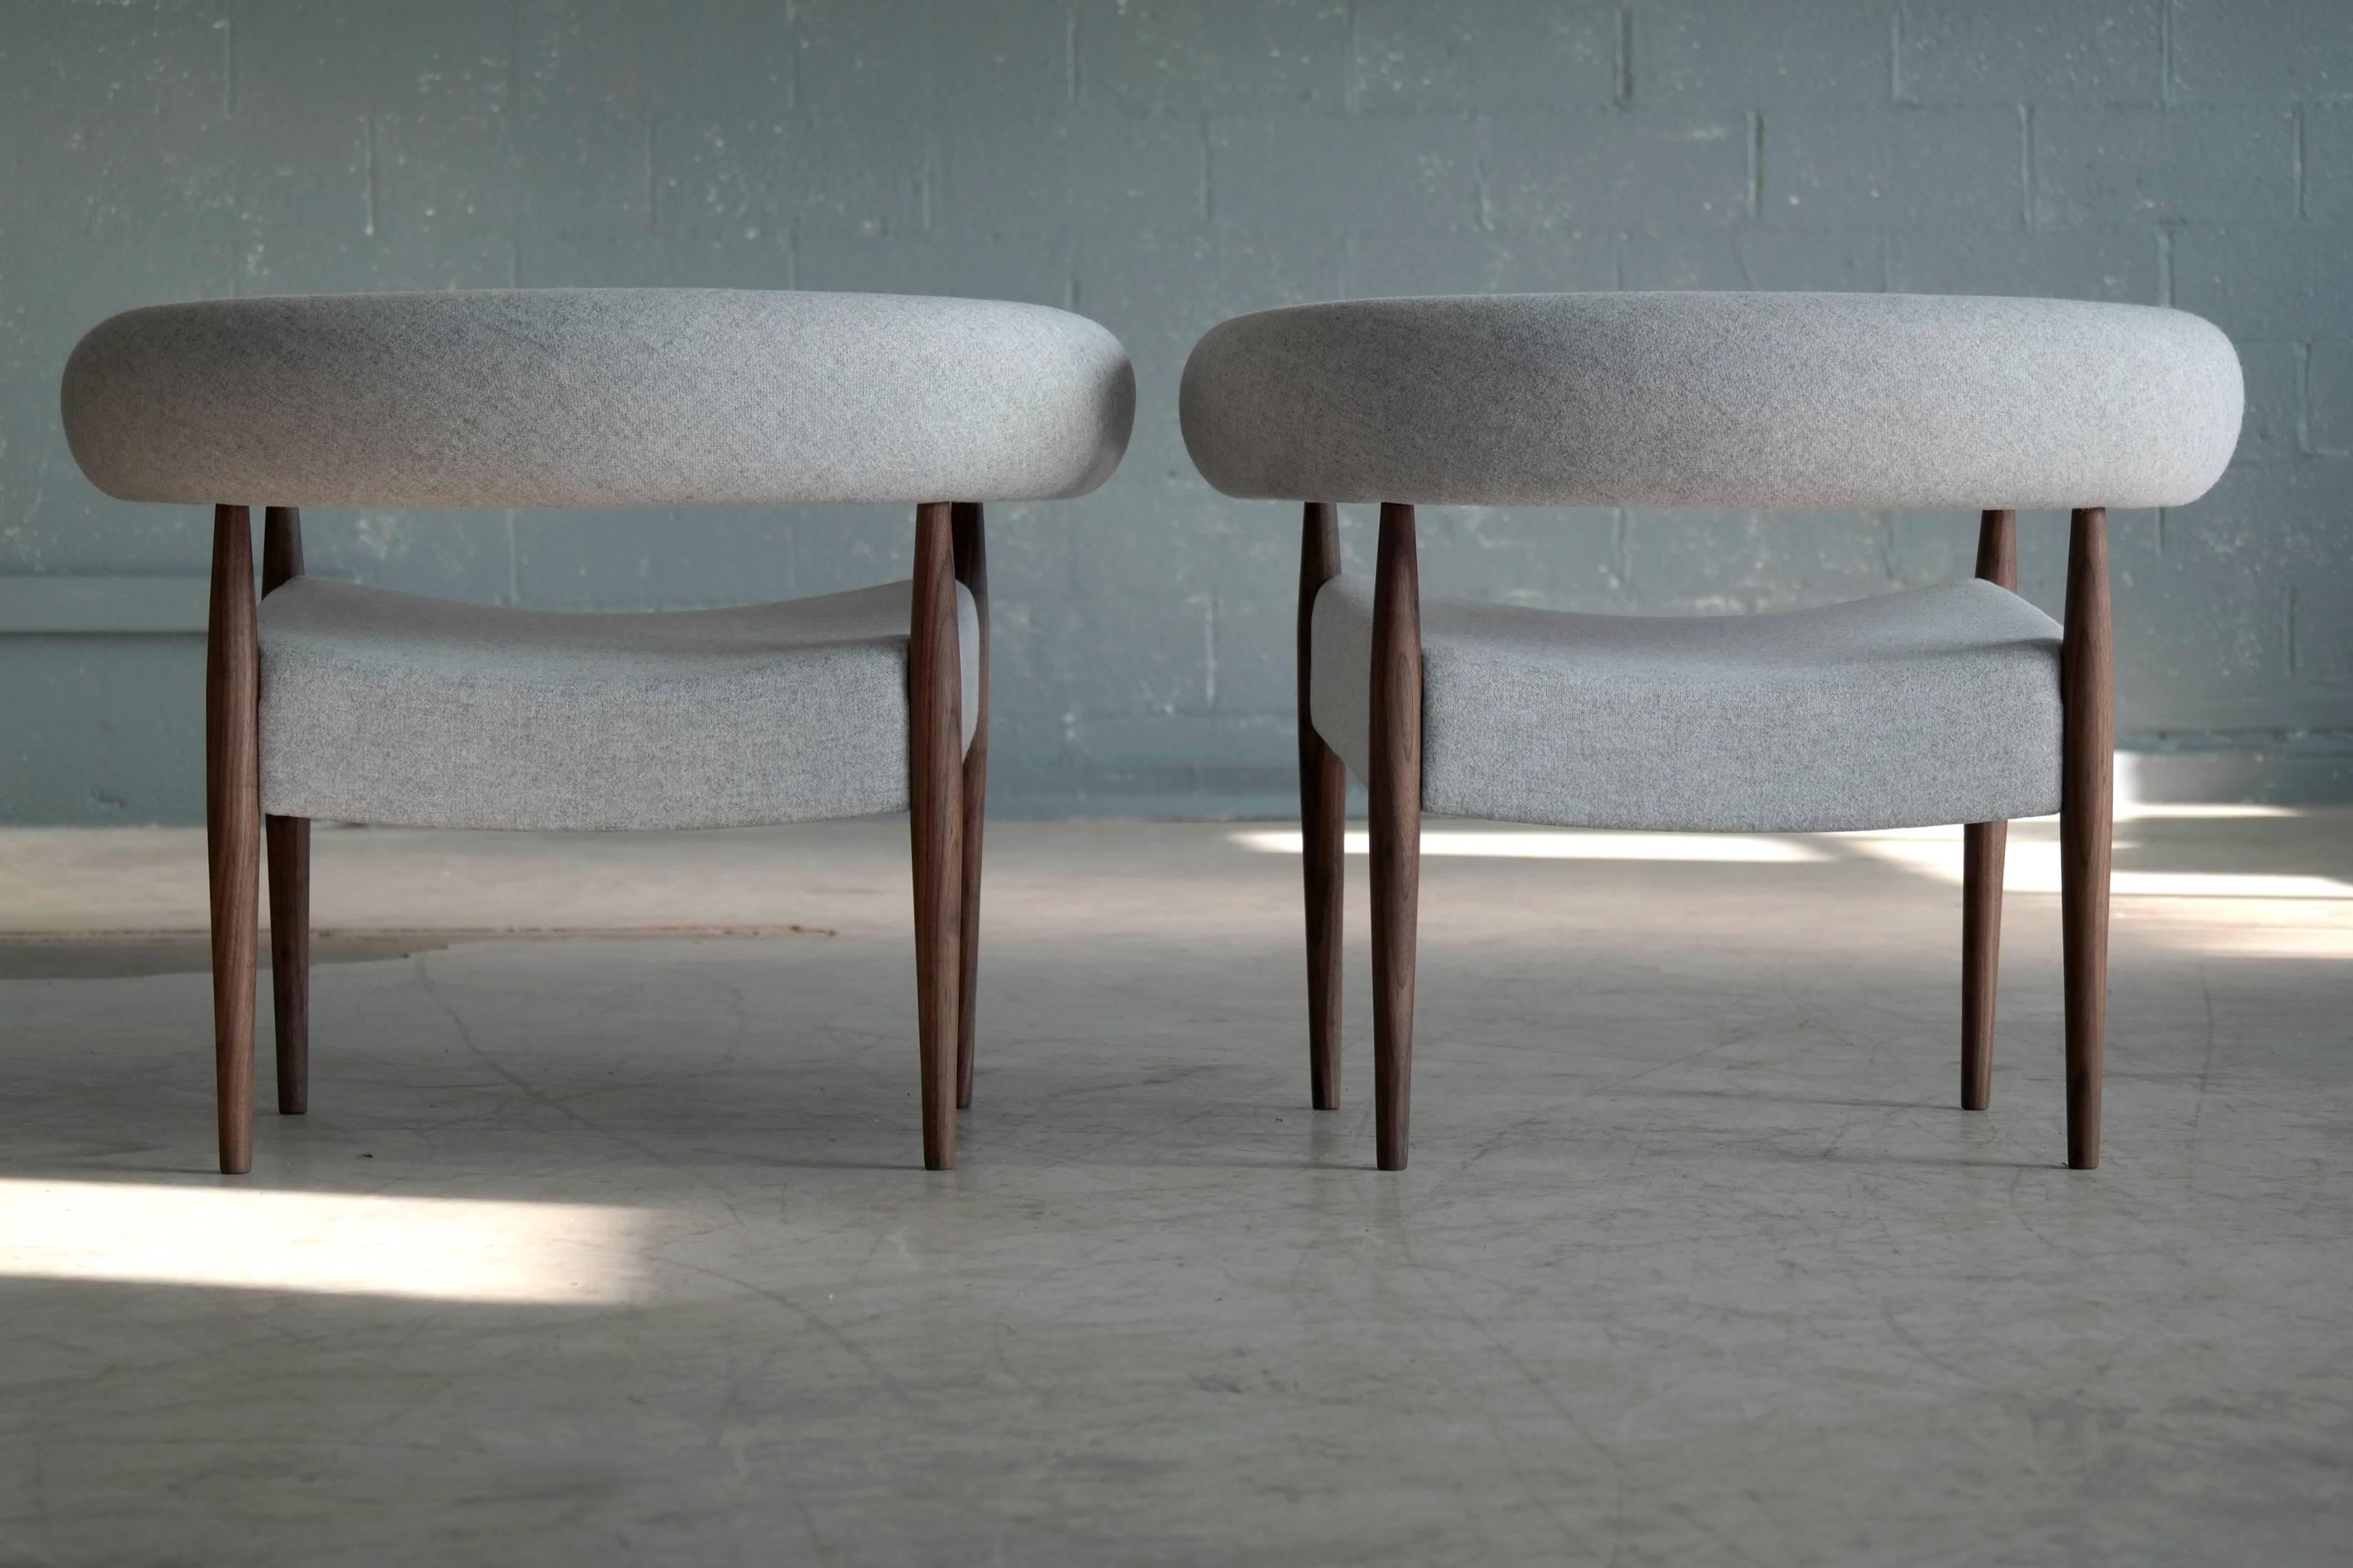 Pair of Nanna Ditzel Ring Chairs in Walnut and Wool for GETAMA, Denmark 1